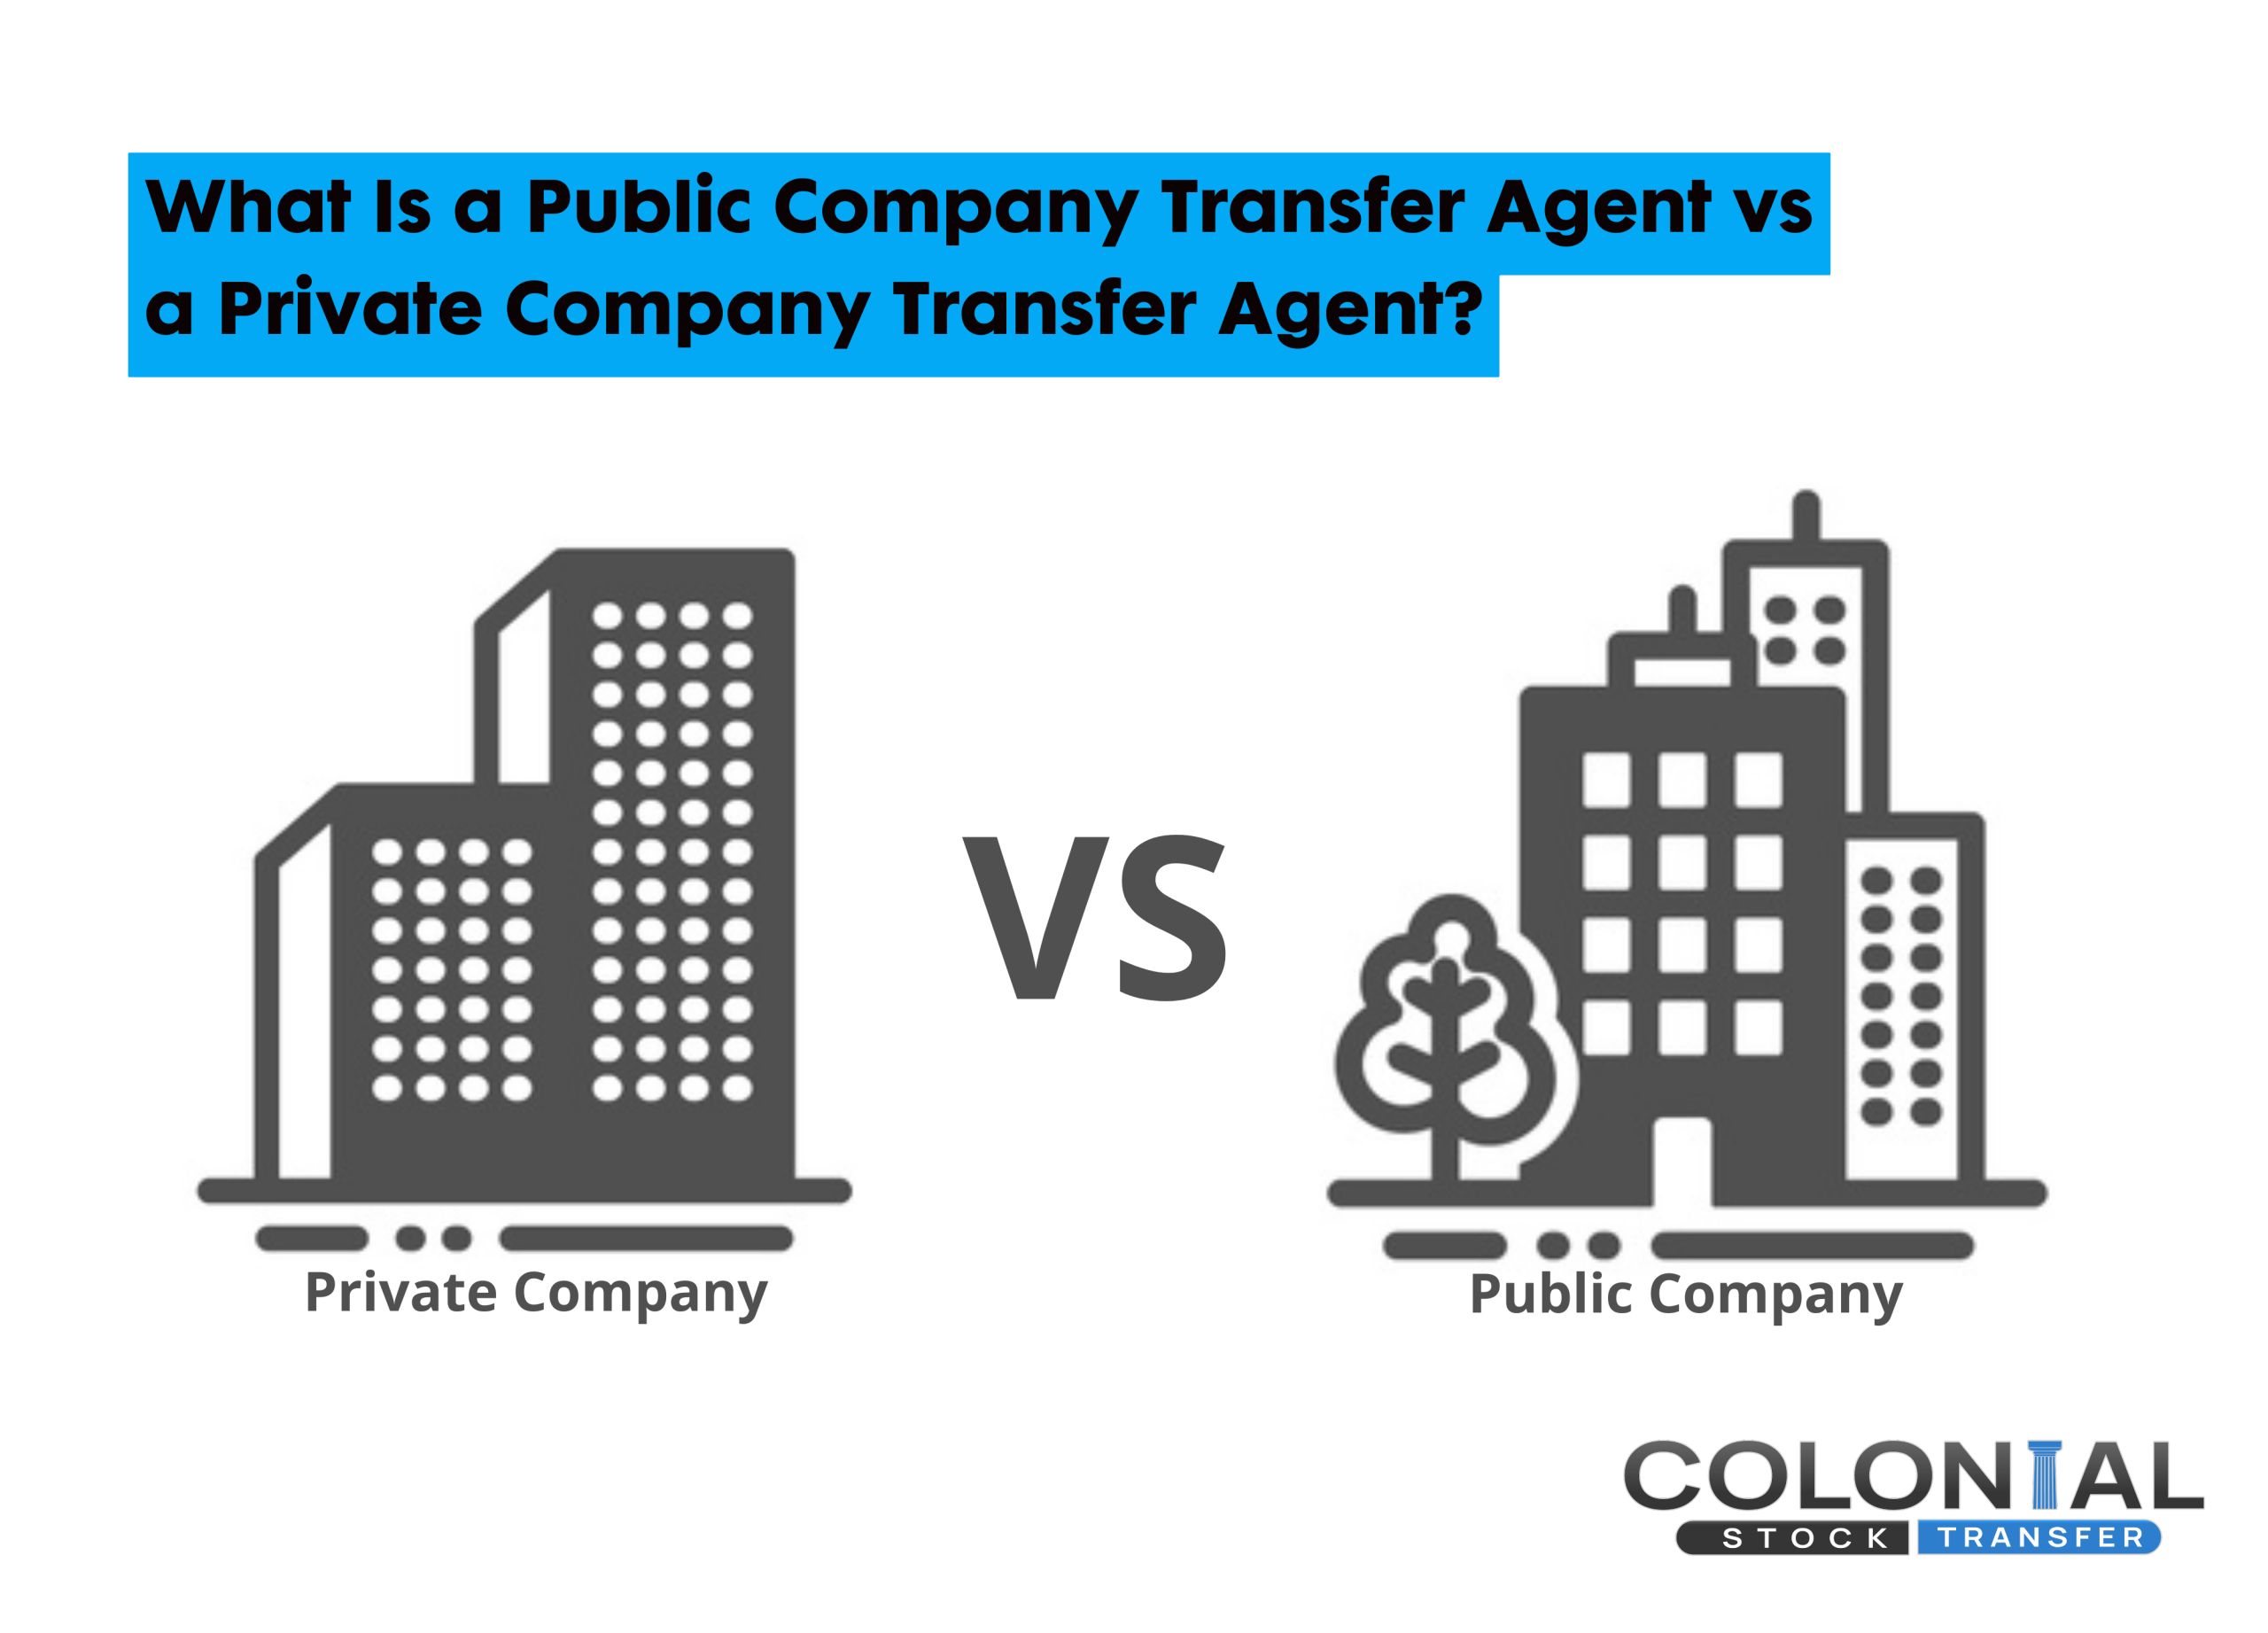 What Is a Public Company Transfer Agent vs a Private Company Transfer Agent?